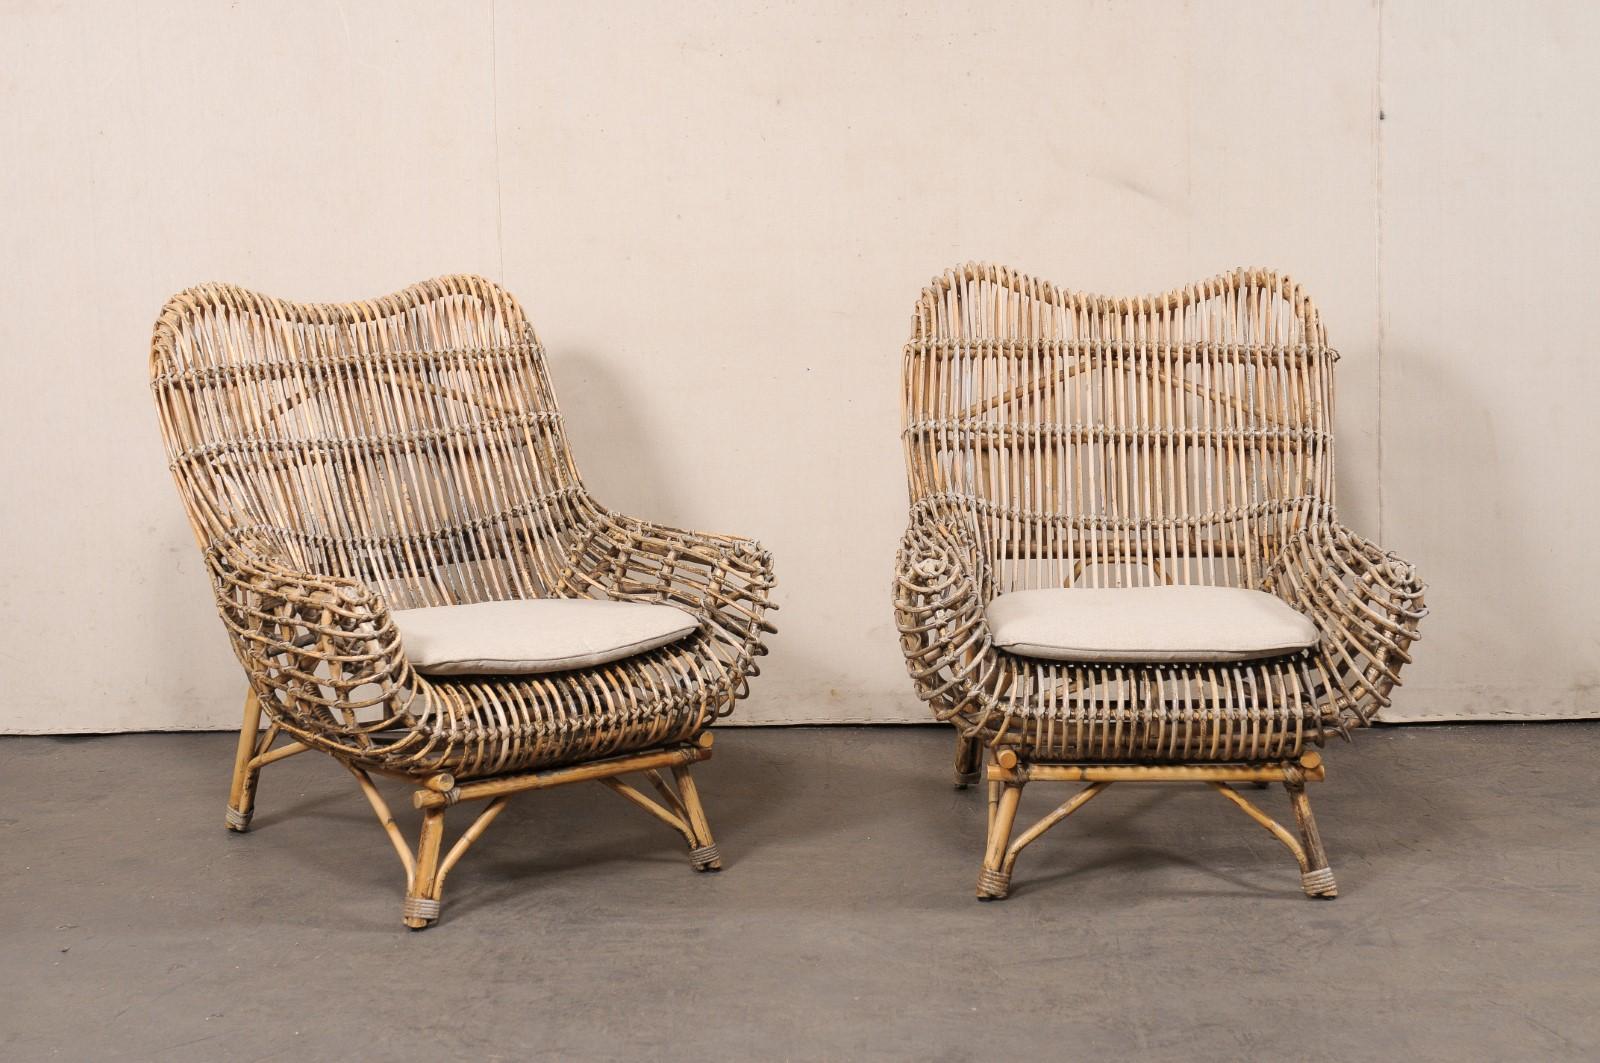 A pair of Dutch bamboo reed and rattan occasional chairs. These vintage chairs from the Netherlands have been created with soft, curvy lines out of bent and molded bamboo reeds and rattan. The upper top rail has a gently swag that slopes downward